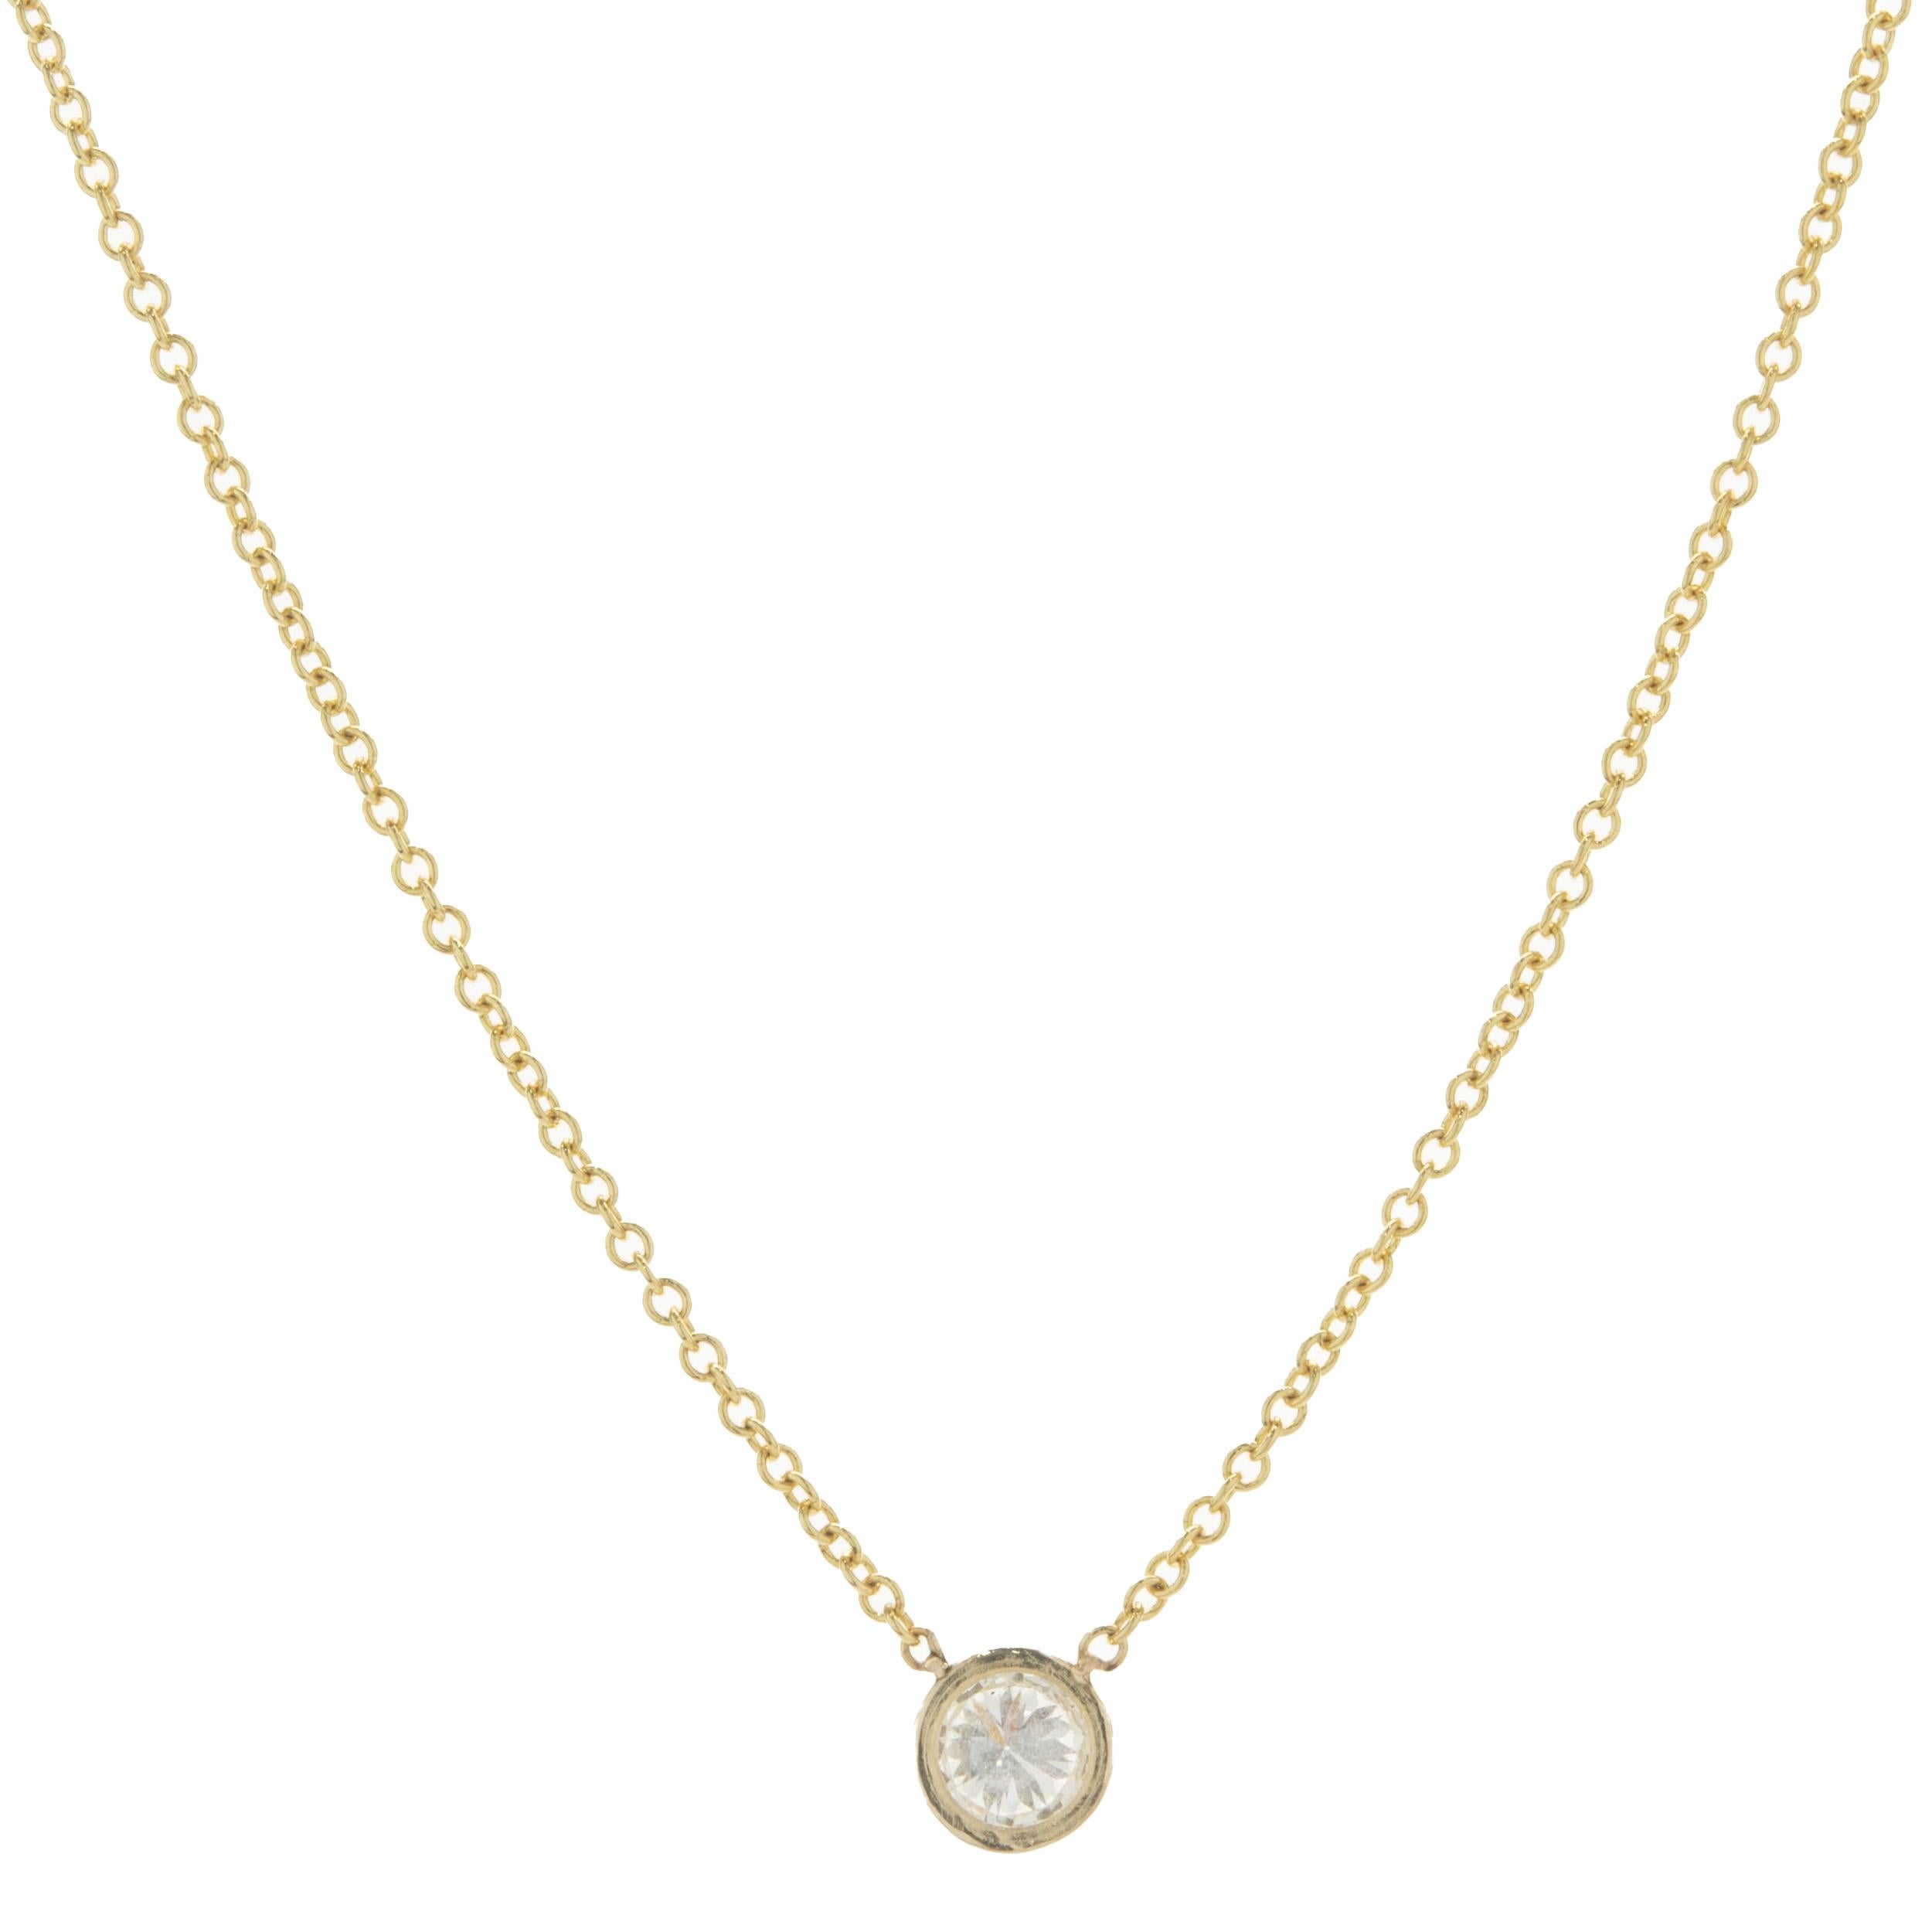 Designer: custom design
Material: 14K yellow gold
Diamond: 1 round = 0.17cttw
Color: G
Clarity: SI1
Dimensions: necklace measures 18-inches in length 
Weight: 1.27 grams
